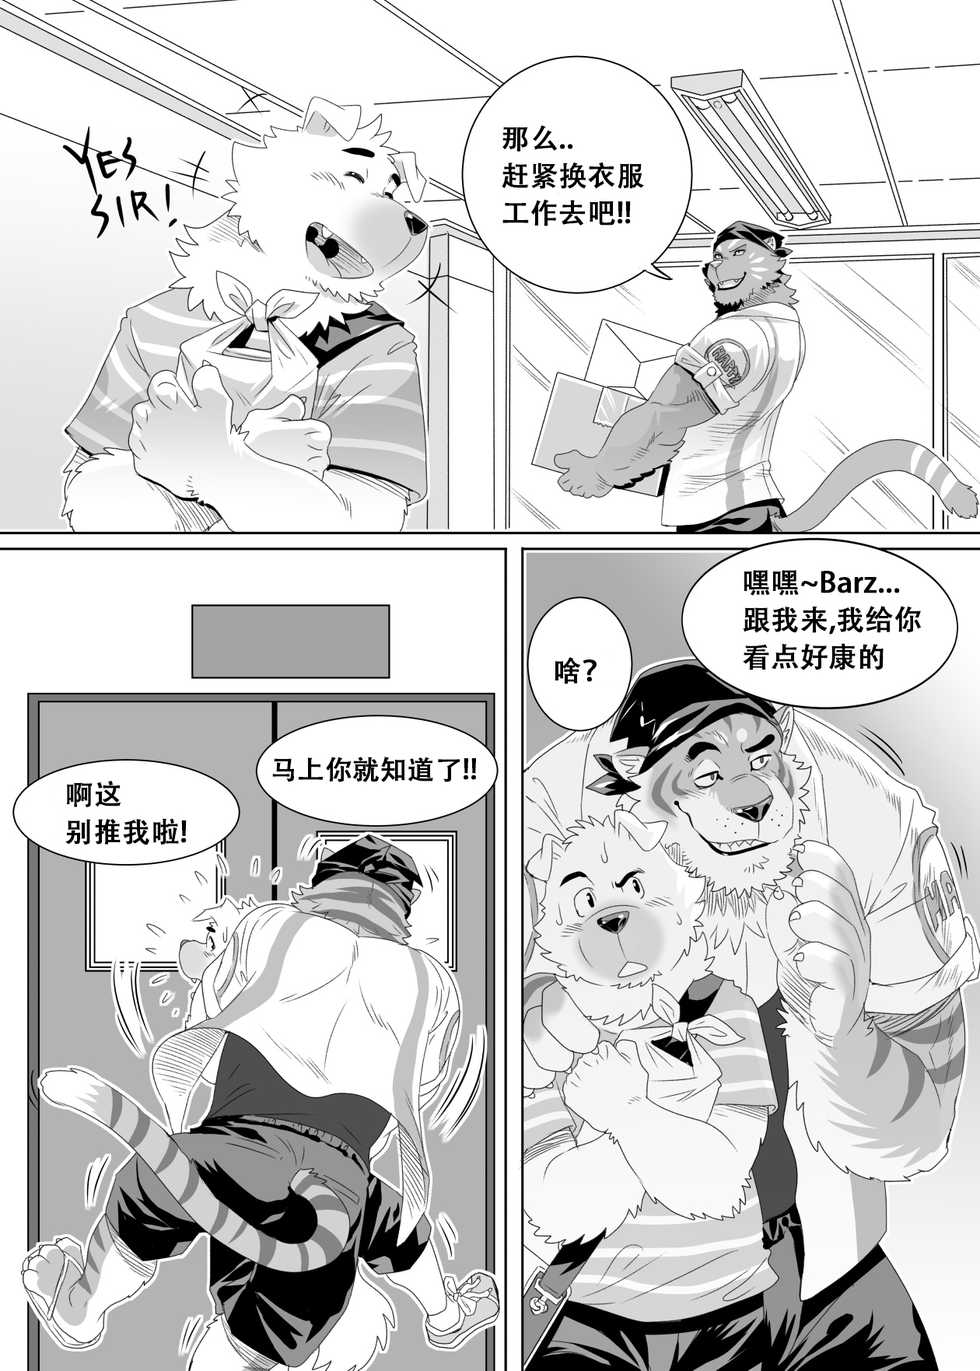 [KUMAHACHI] - "开心"便利店 ["Happy" Convenience Store] [Chinese] - Page 5